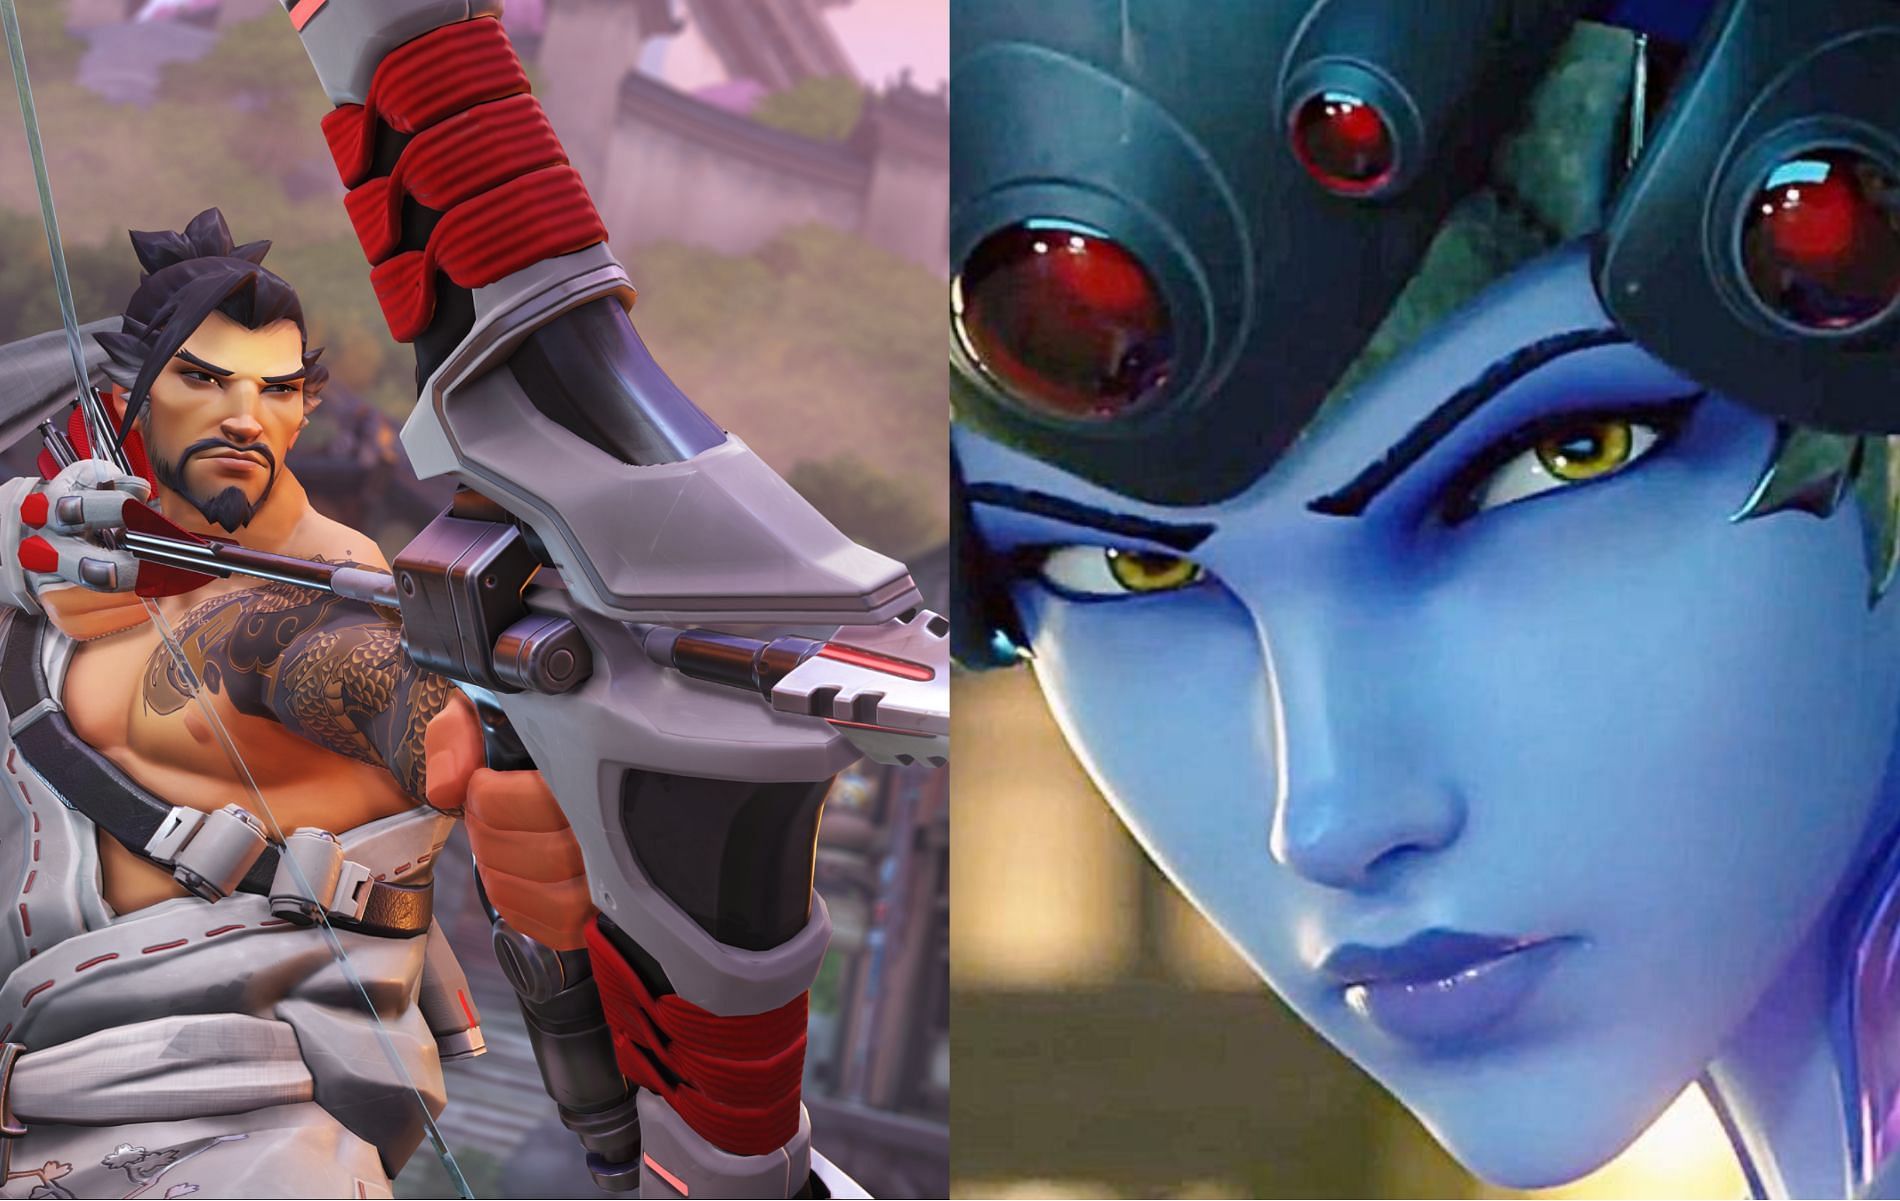 Hanzo (left) and Widowmaker (right) together are ice cold killers (Images via Blizzard Entertainment)